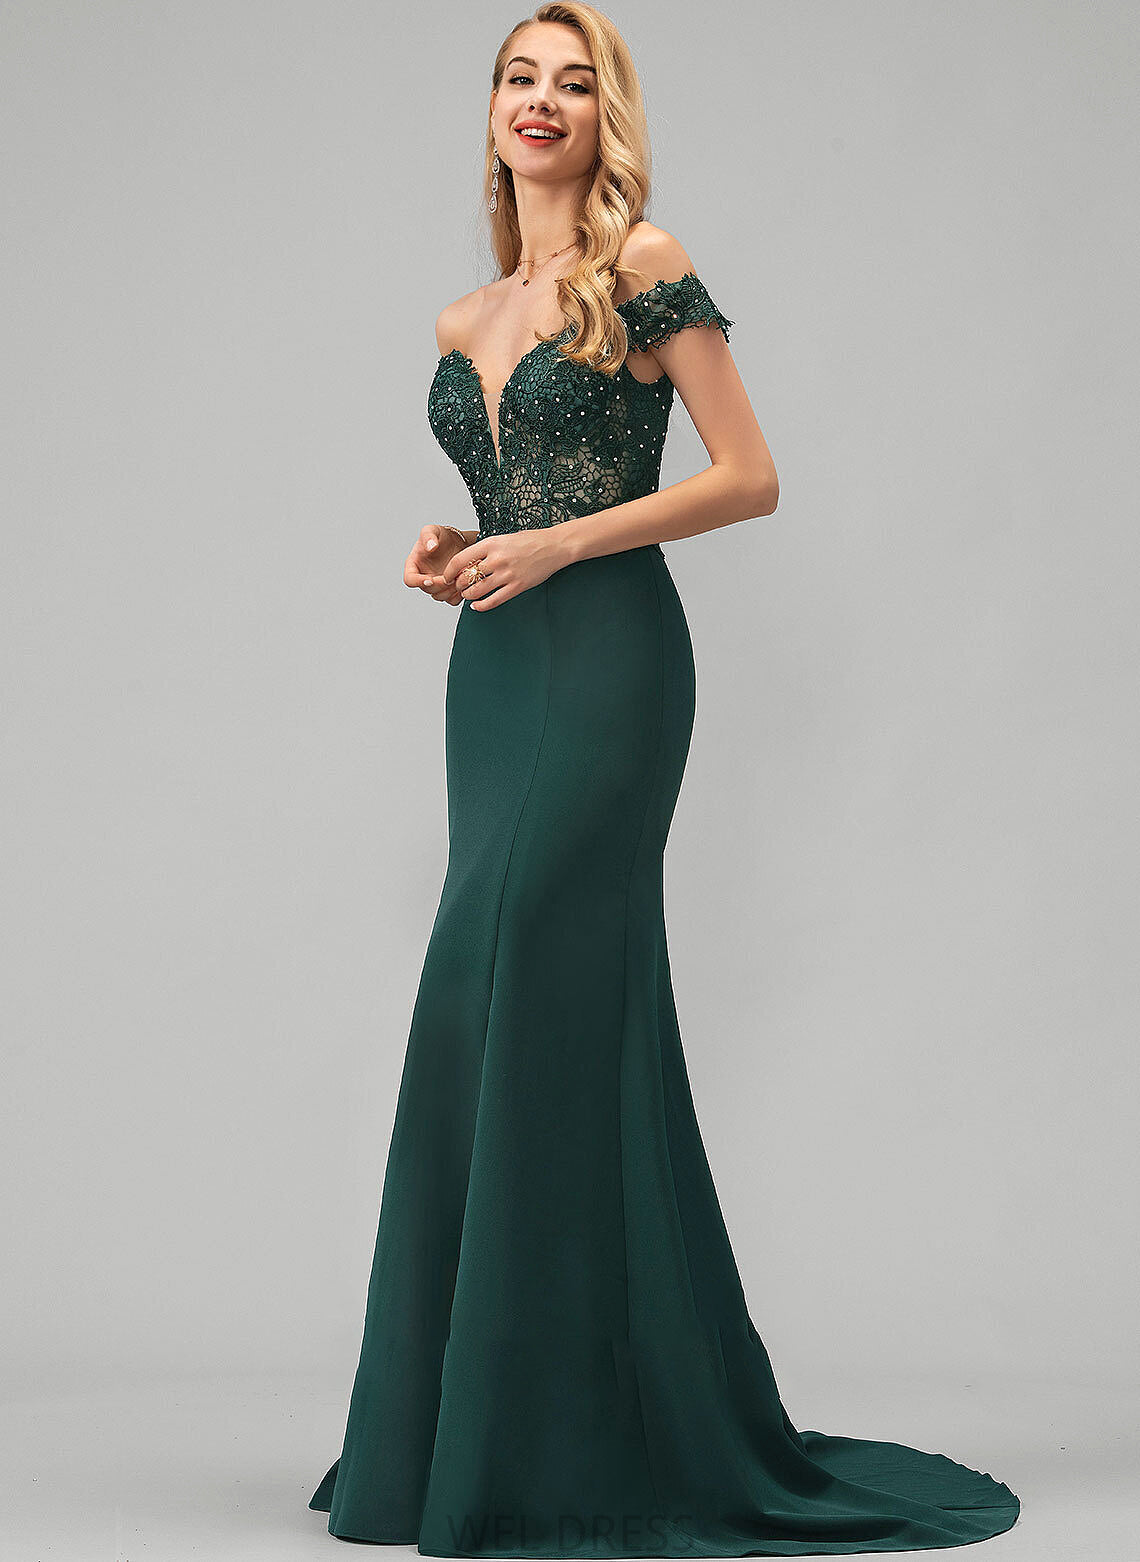 Prom Dresses Trumpet/Mermaid Sequins With Sweep Crepe Lace Off-the-Shoulder Stretch Train Juliette Beading